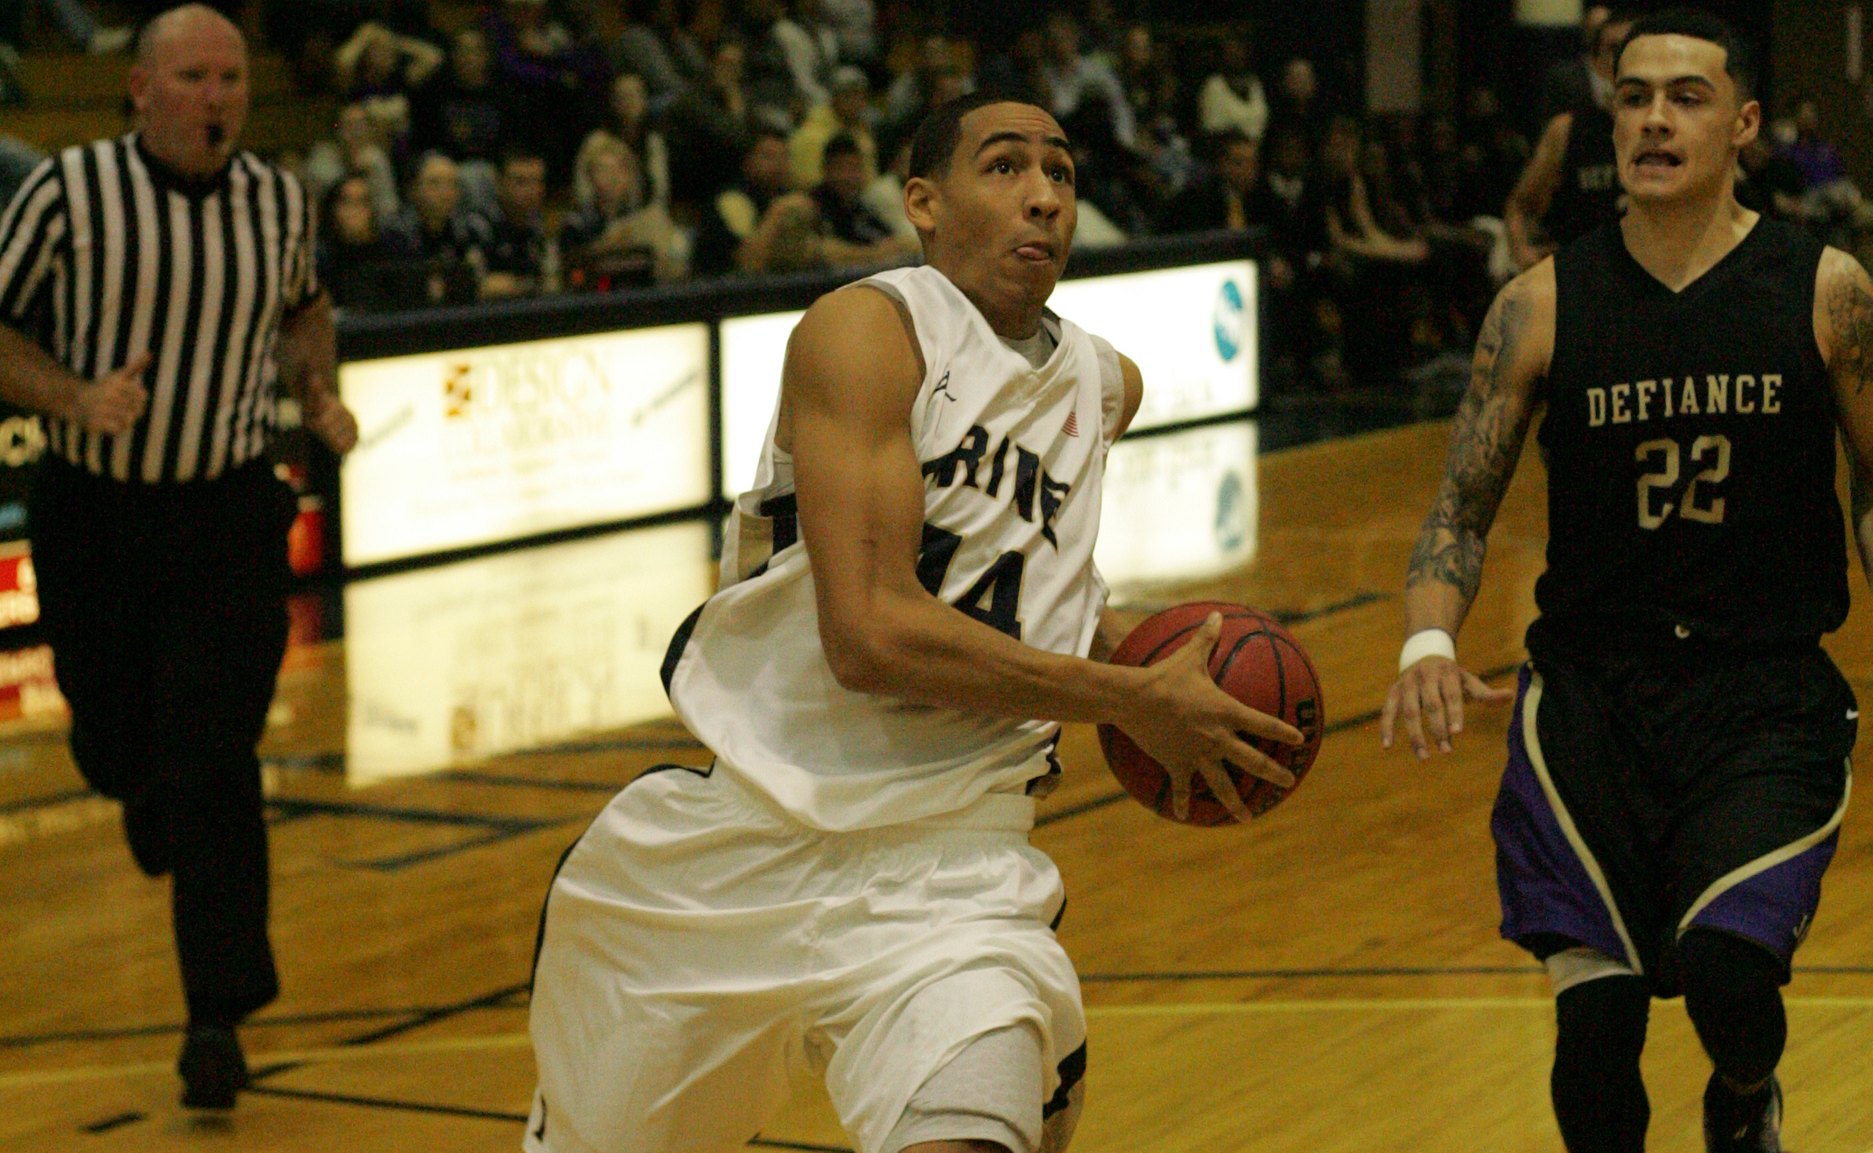 Copeland Scores 39 in Loss to Ohio Wesleyan